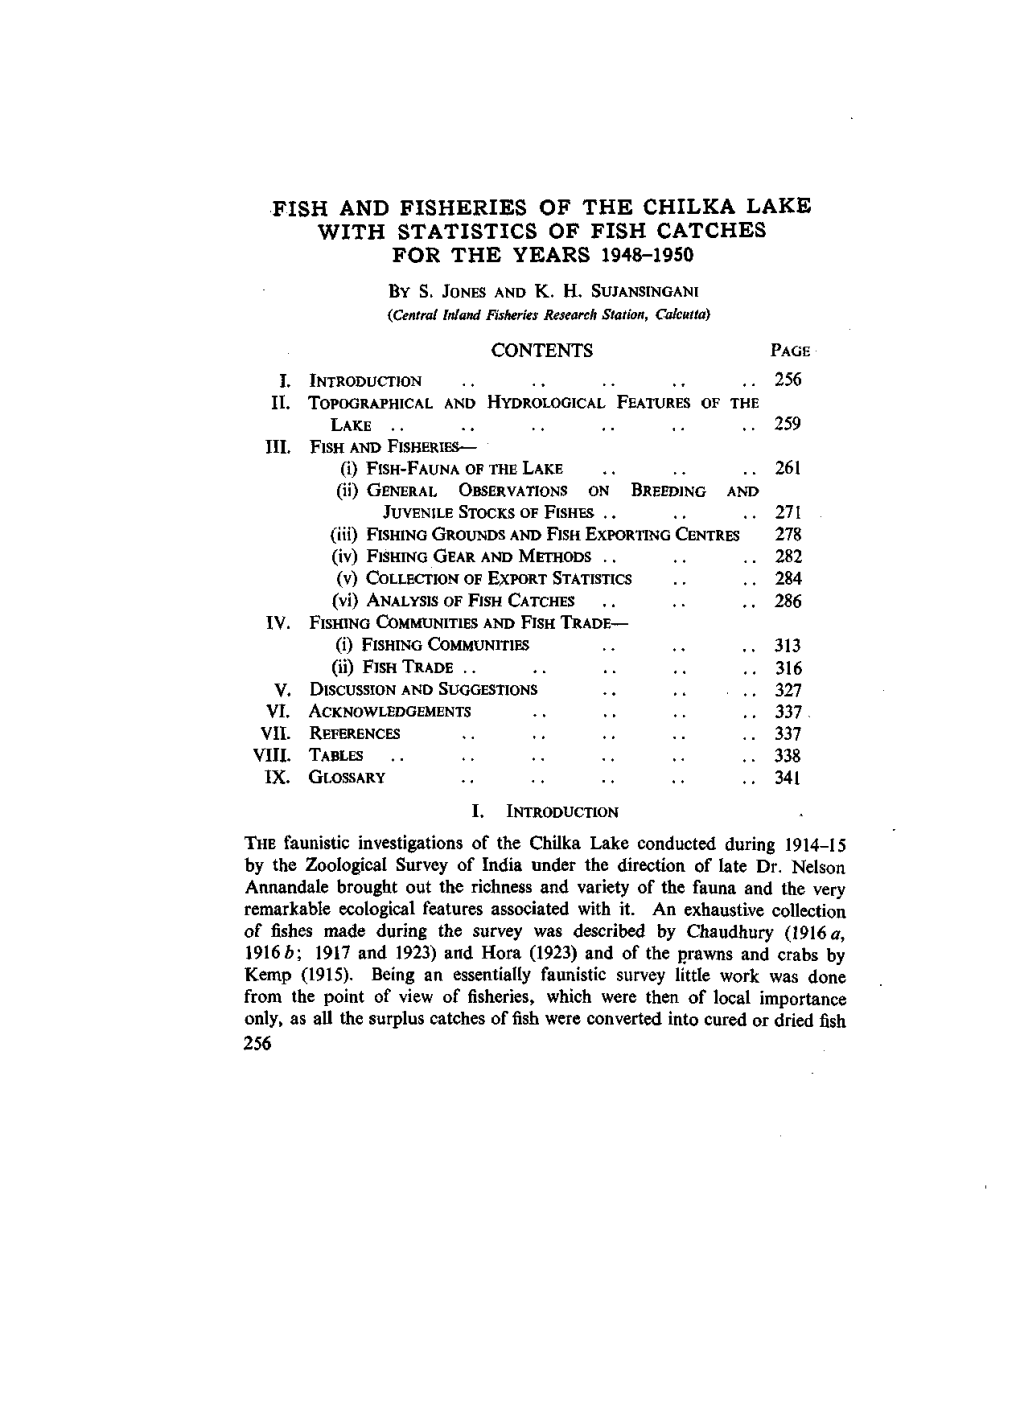 Fish and Fisheries of the Chilka Lake with Statistics of Fish Catches for the Years 1948-1950